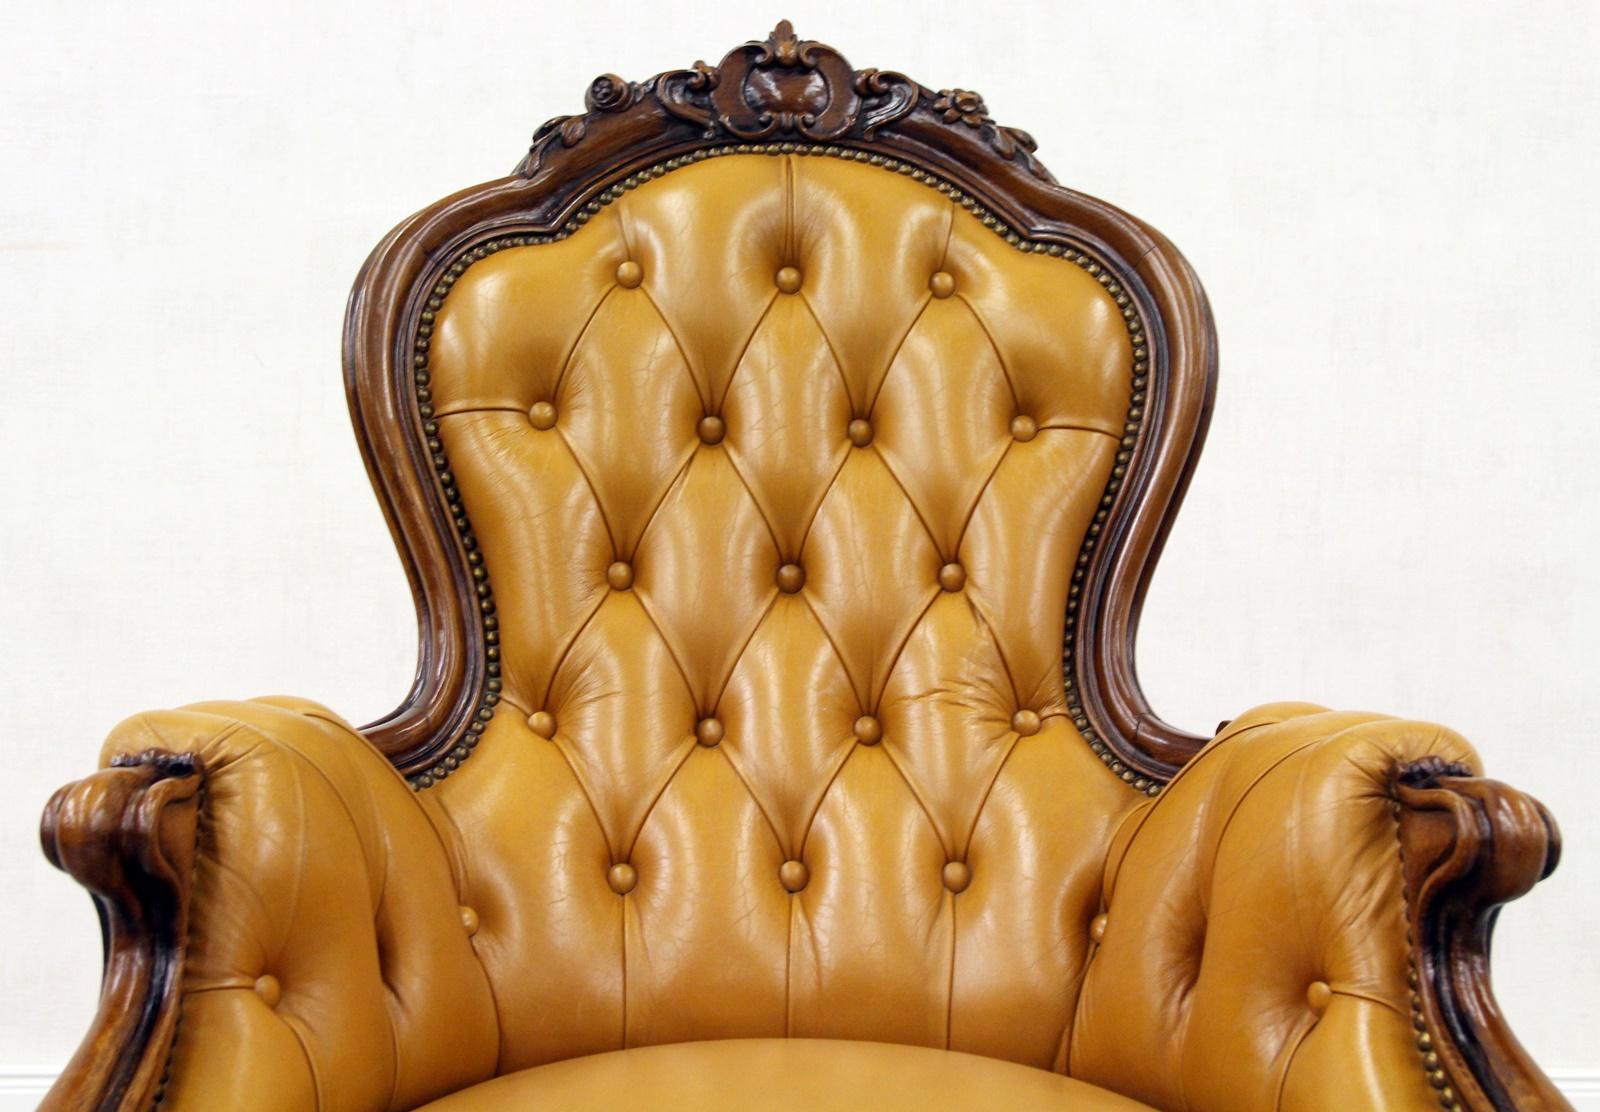 Chesterfield / Chippendale
armchair
Measures: Height x 105cm, width x 66cm, depth x 78cm
Condition: The armchair is in good condition for the age and still has the charm of the 